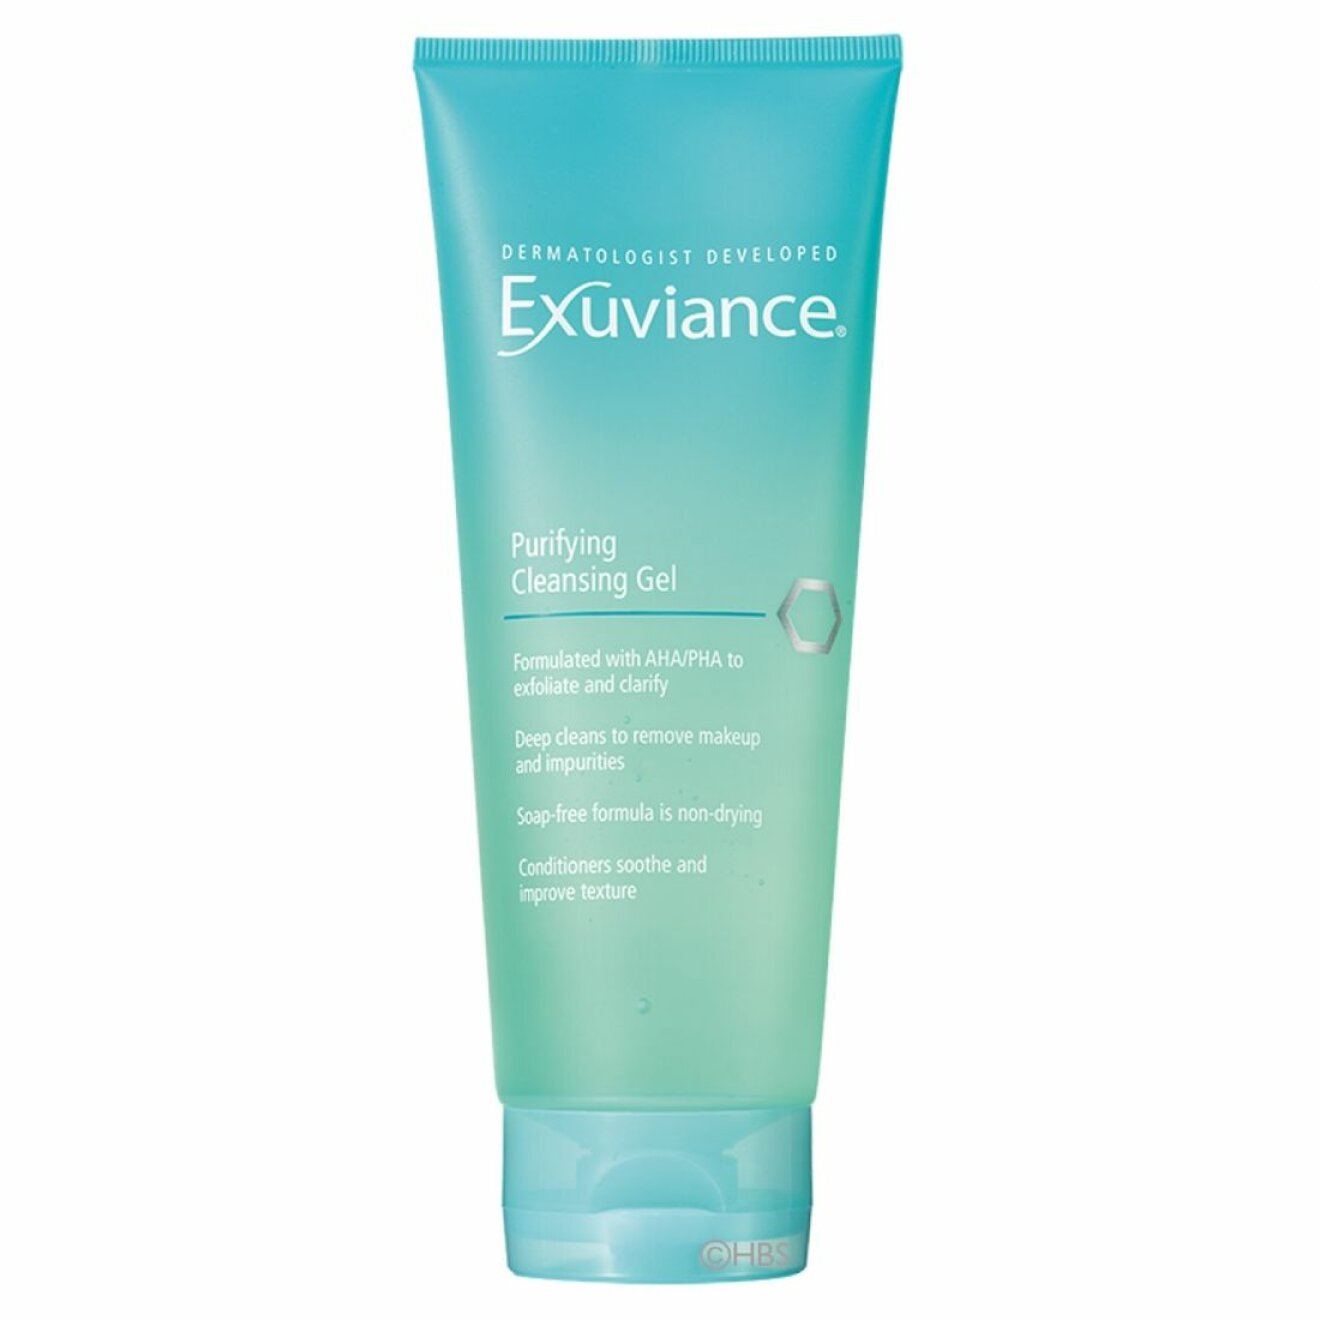 Purifying cleansing gel från Exuviance.